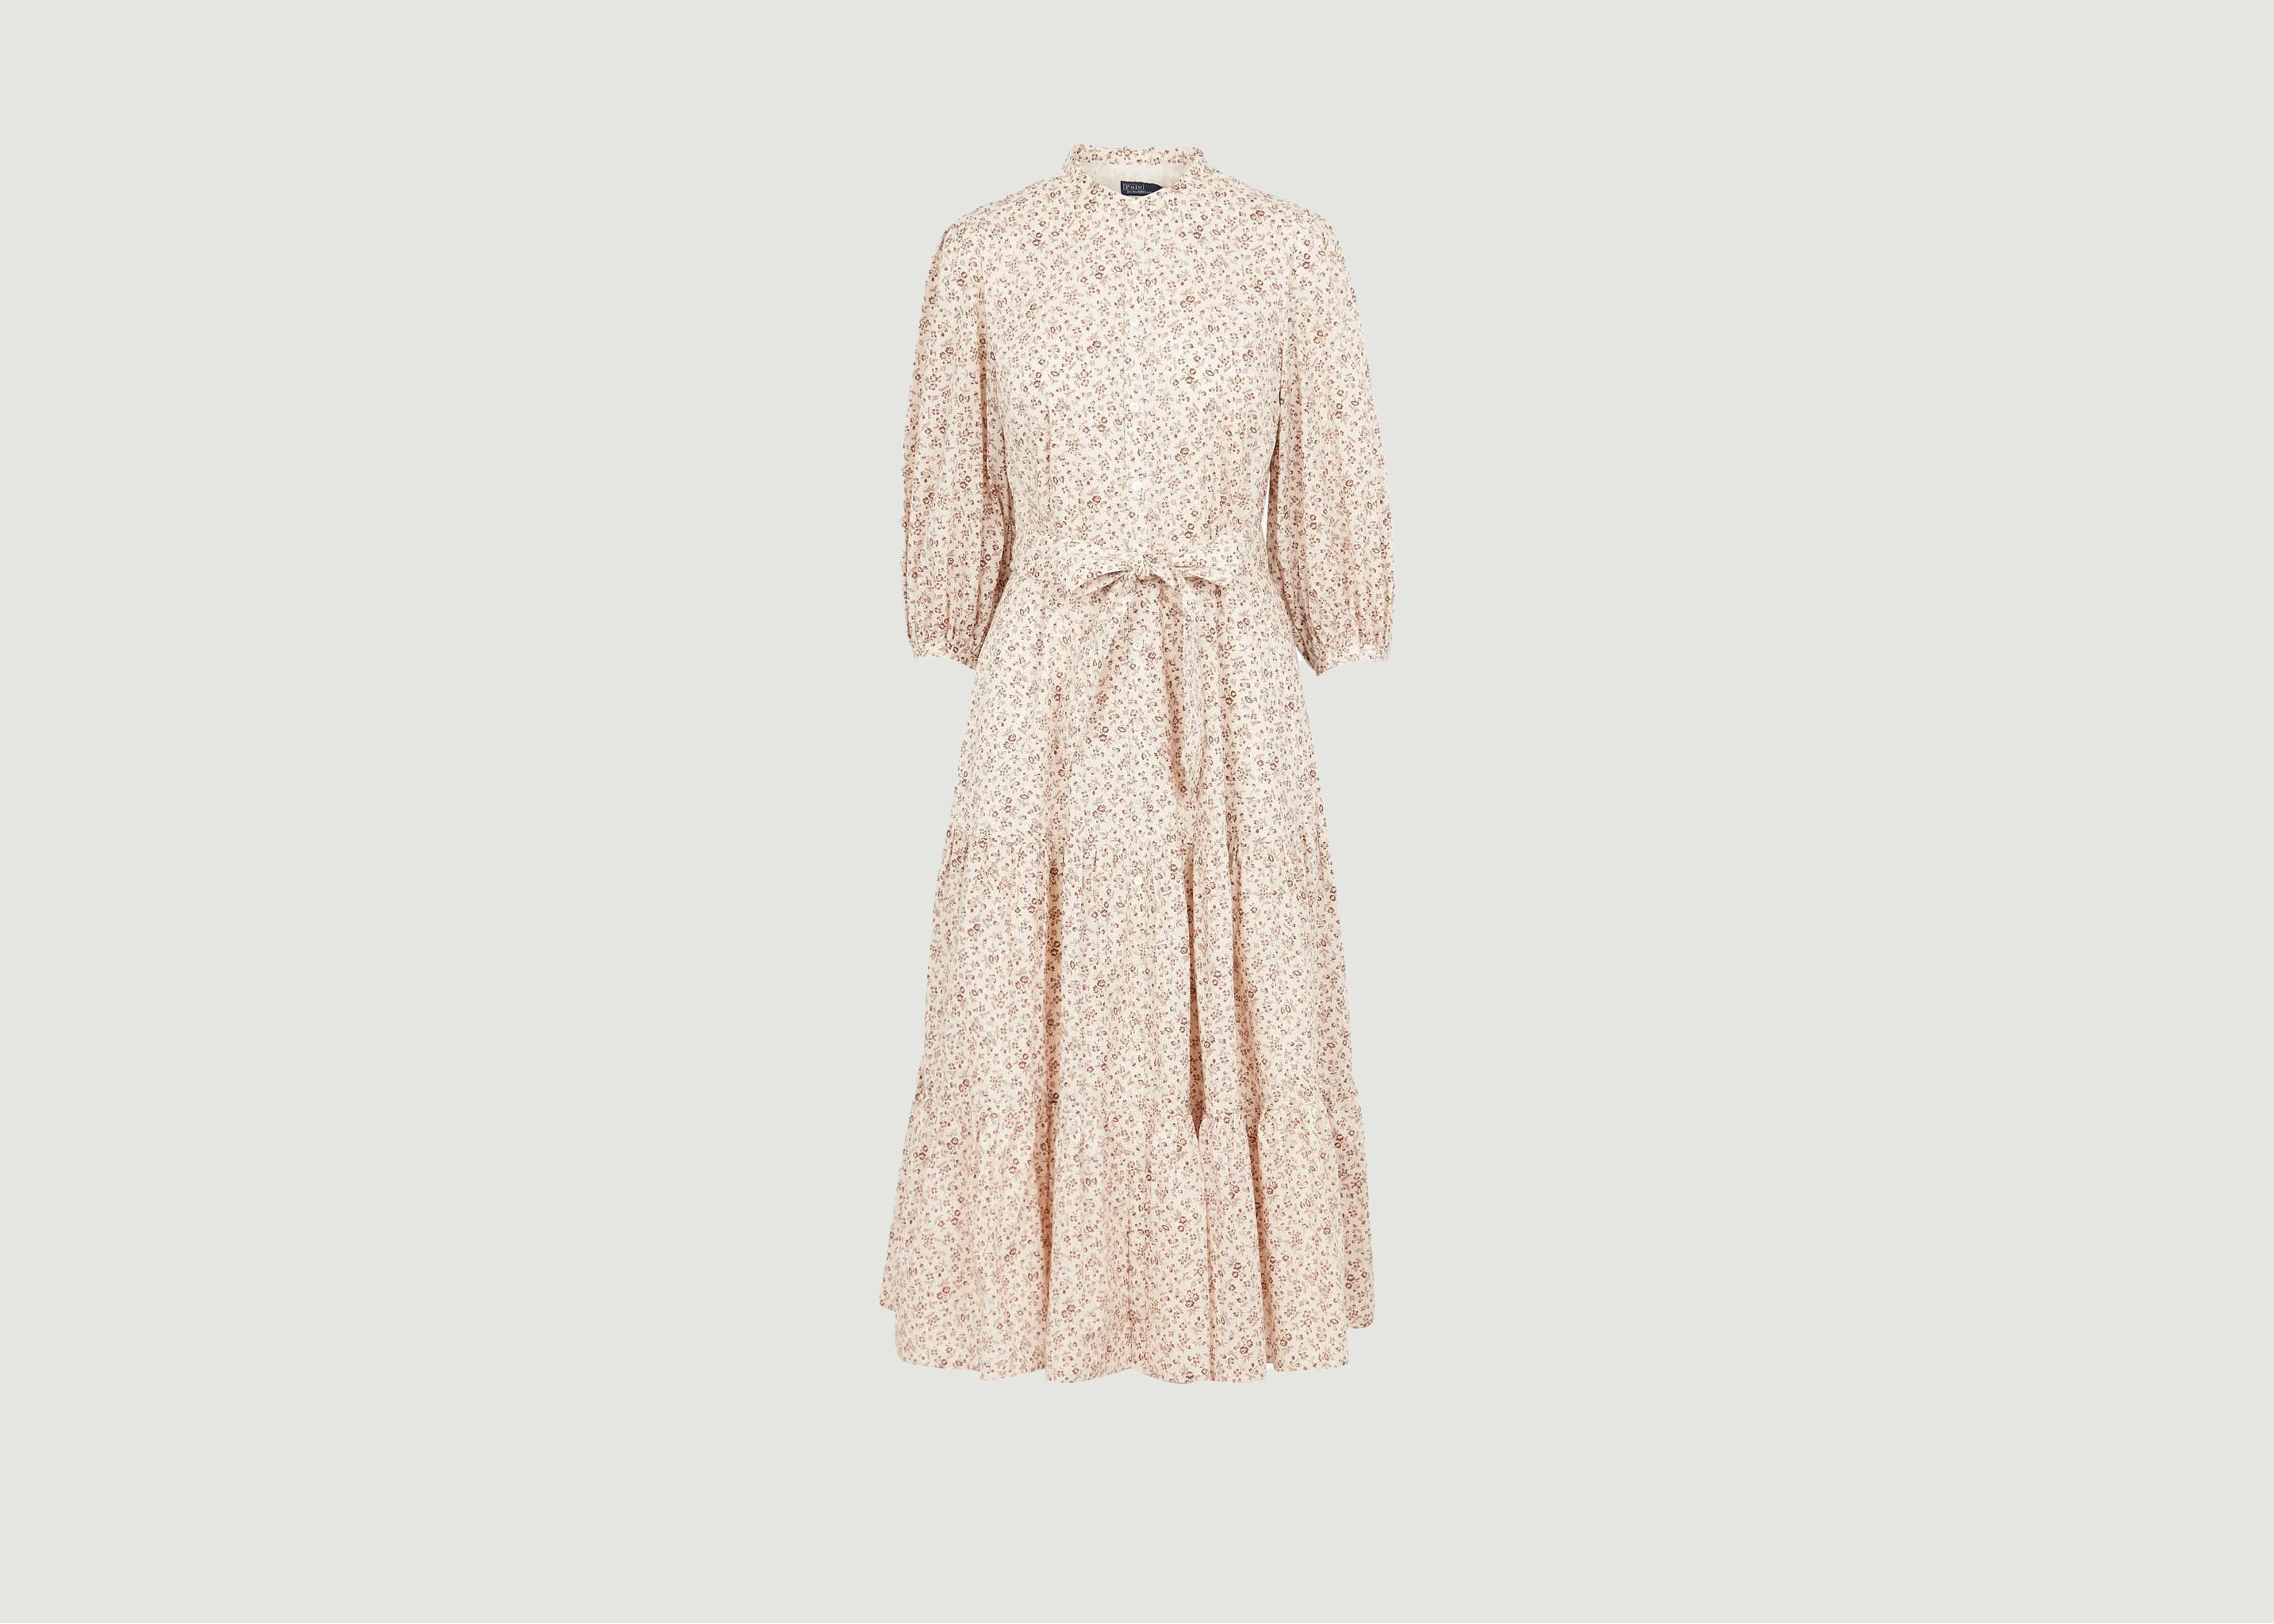 Belted floral dress with cotton ruffles - Polo Ralph Lauren